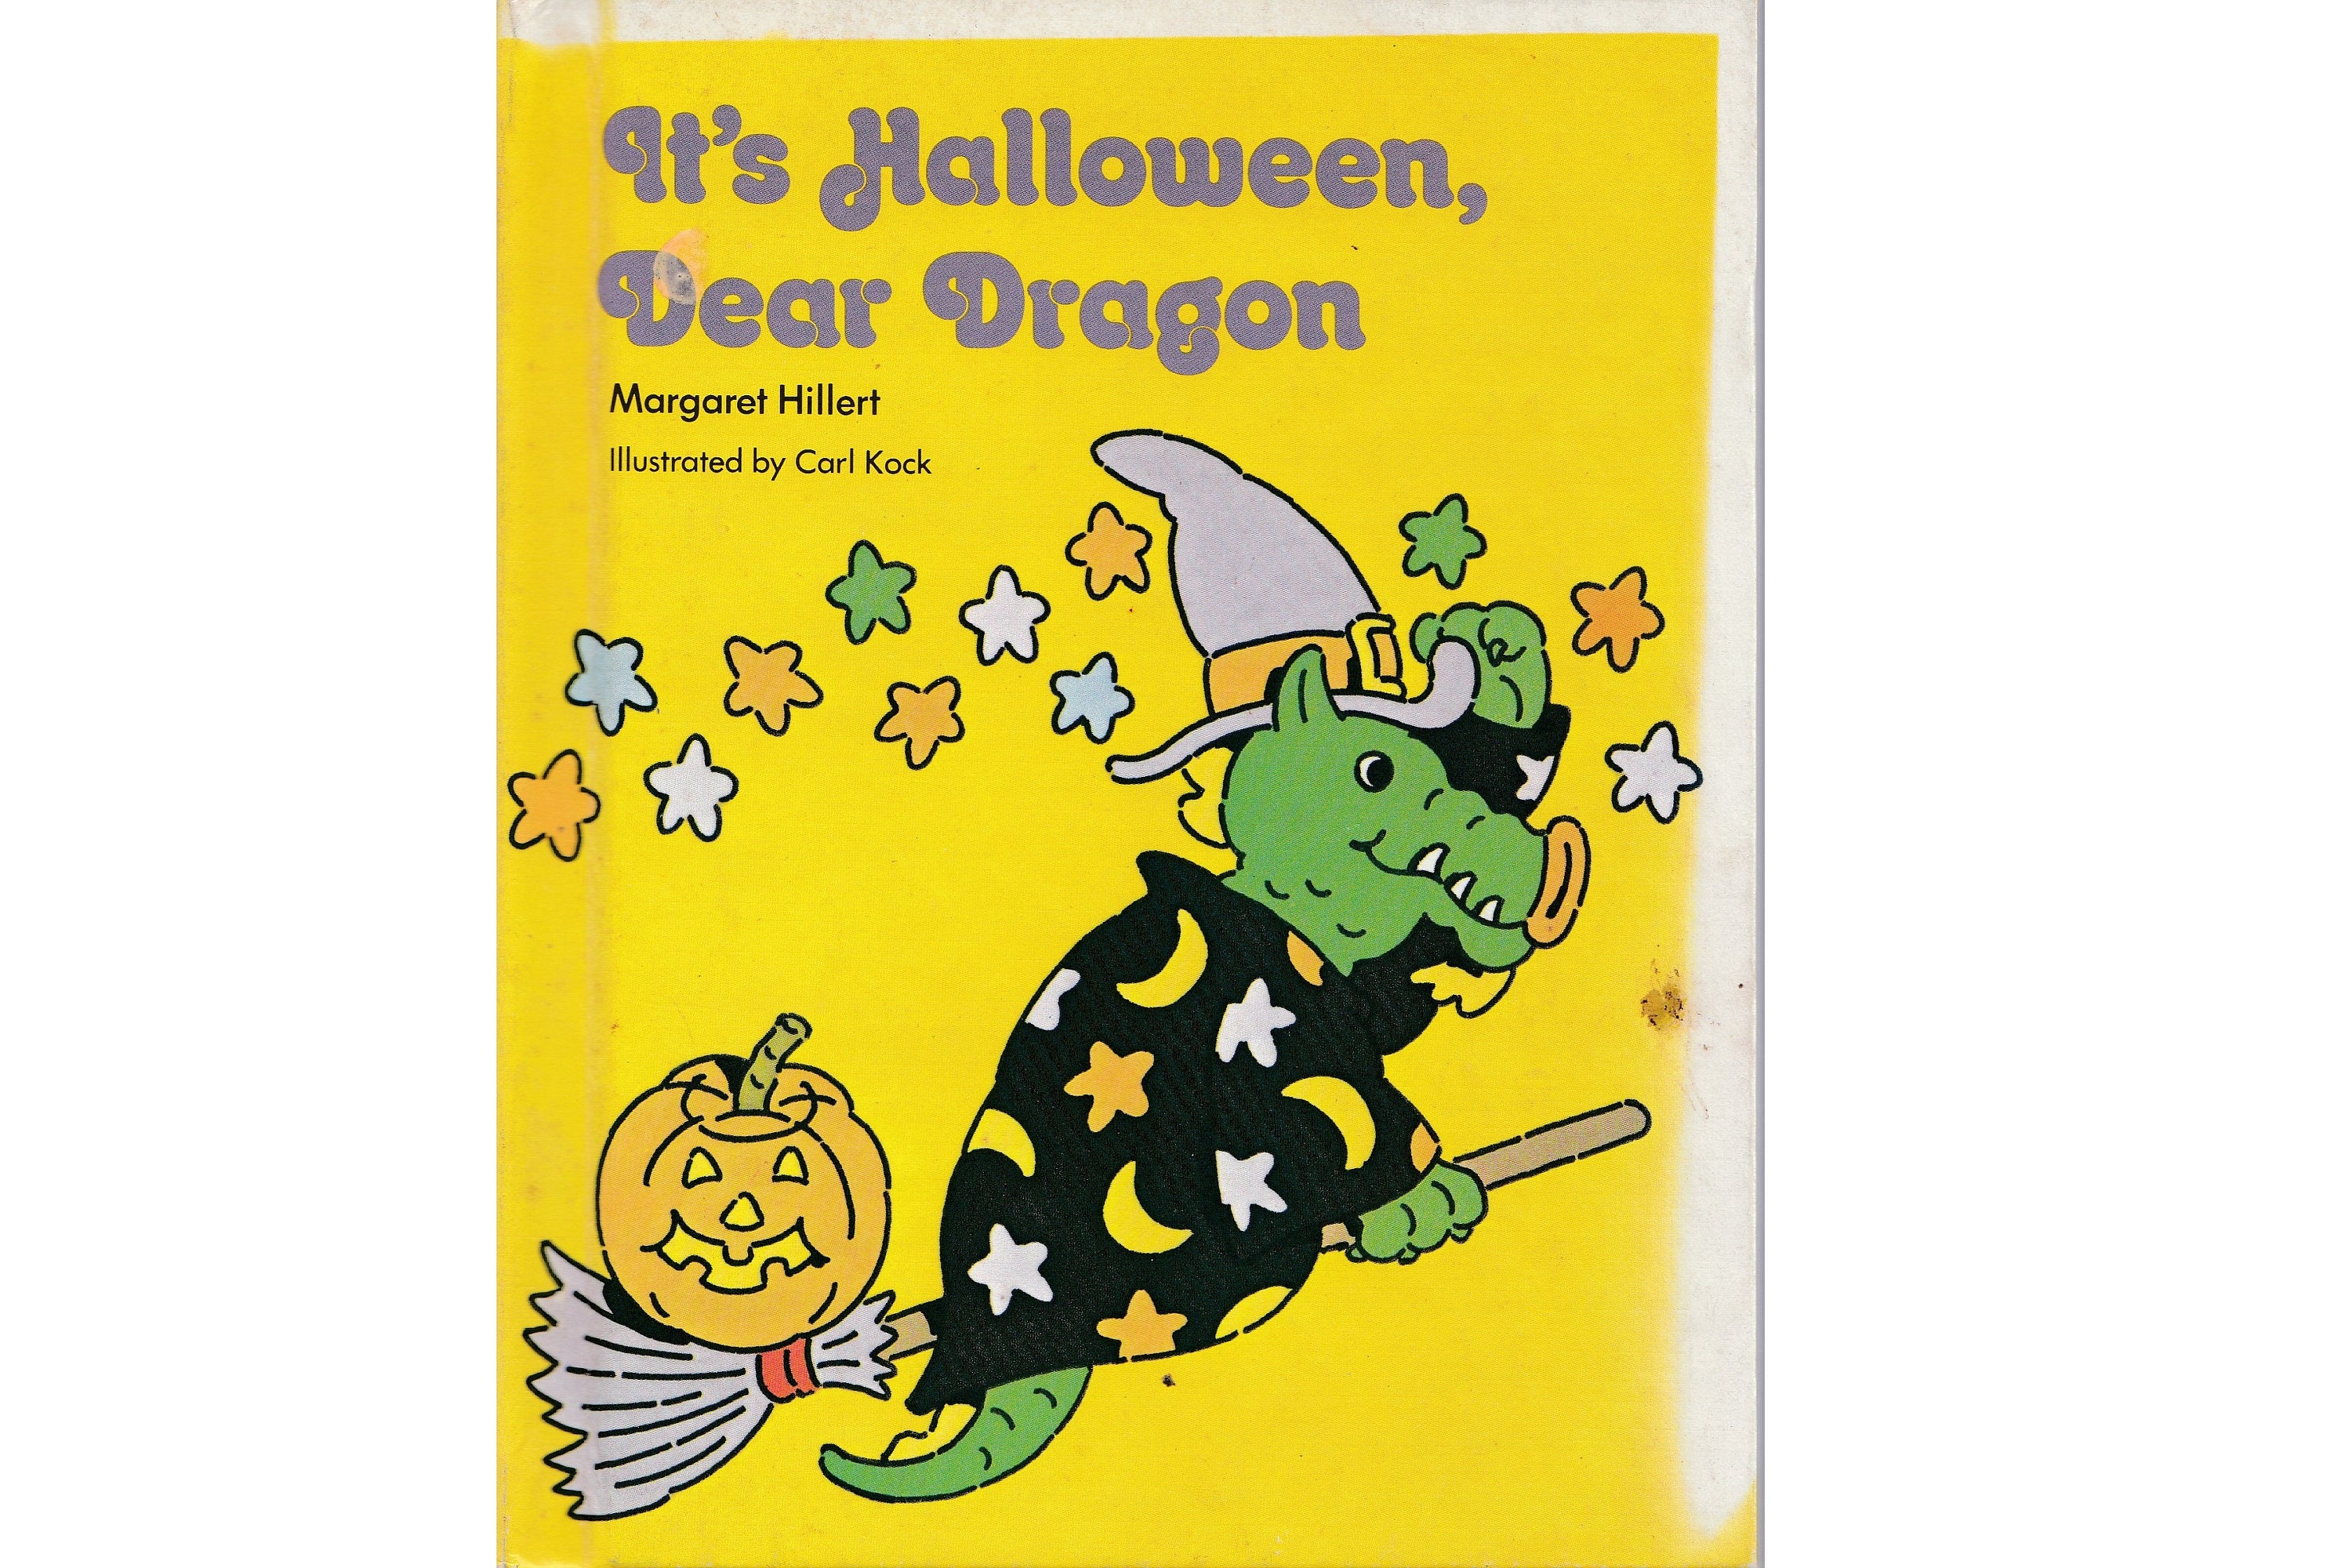 Halloween: The History Behind This Spooky Holiday – The Dragon Tales